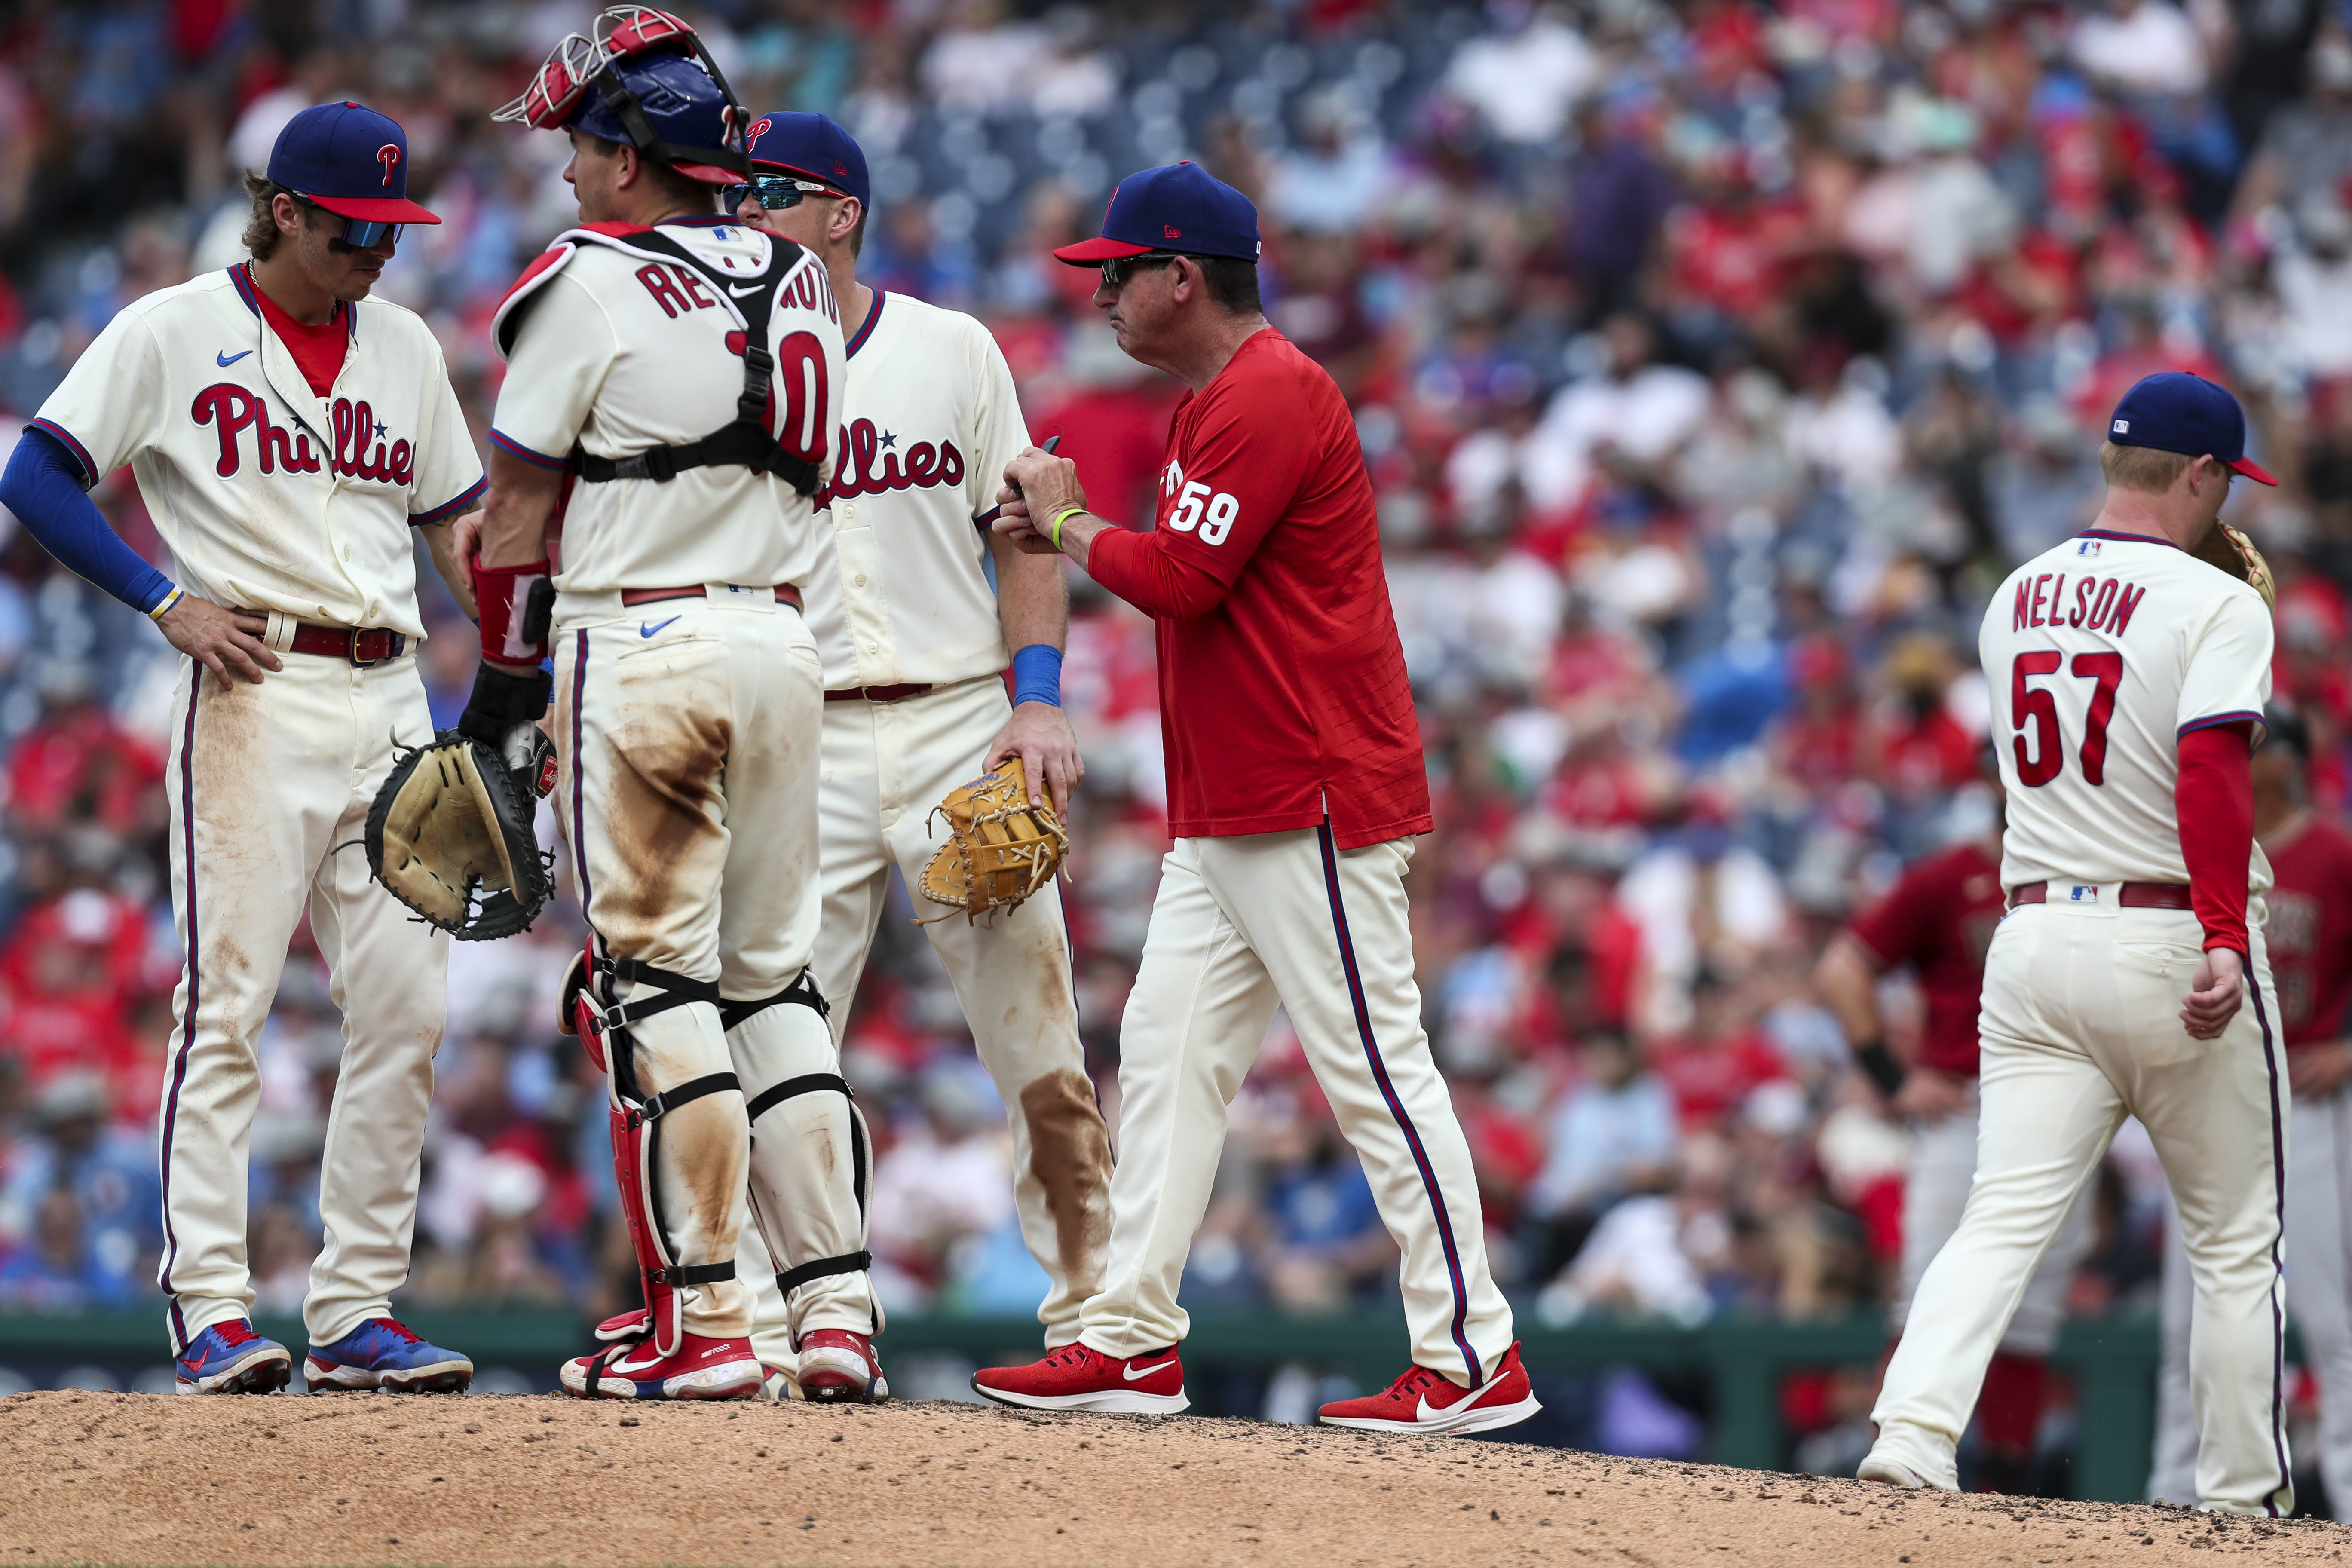 Philadelphia Phillies Disappoint in Consecutive Games Against